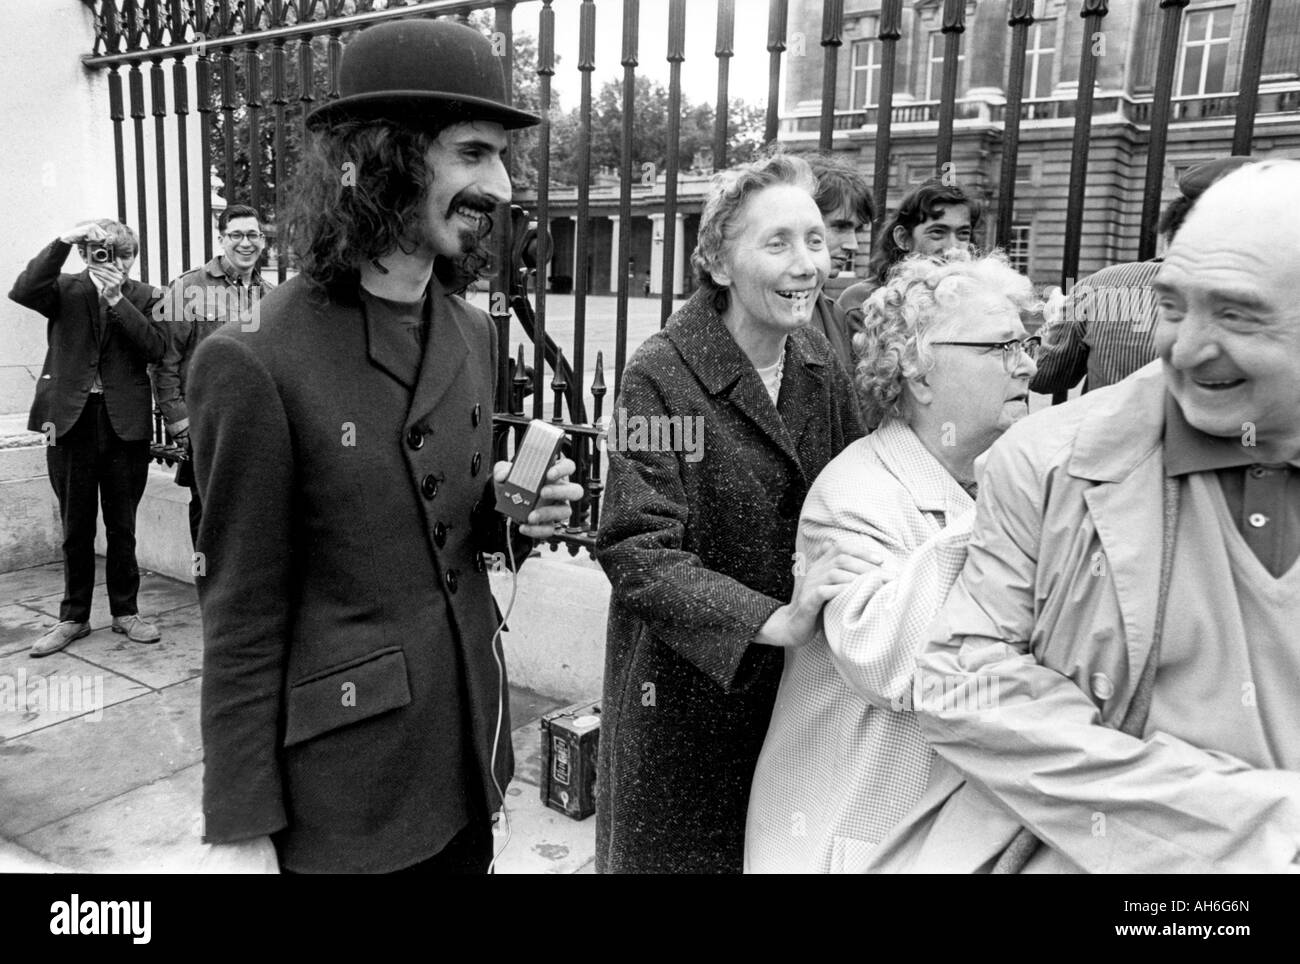 FRANK ZAPPA  US musician attempts to interview people oputside outside Buckingham Palace in September 1967 Stock Photo